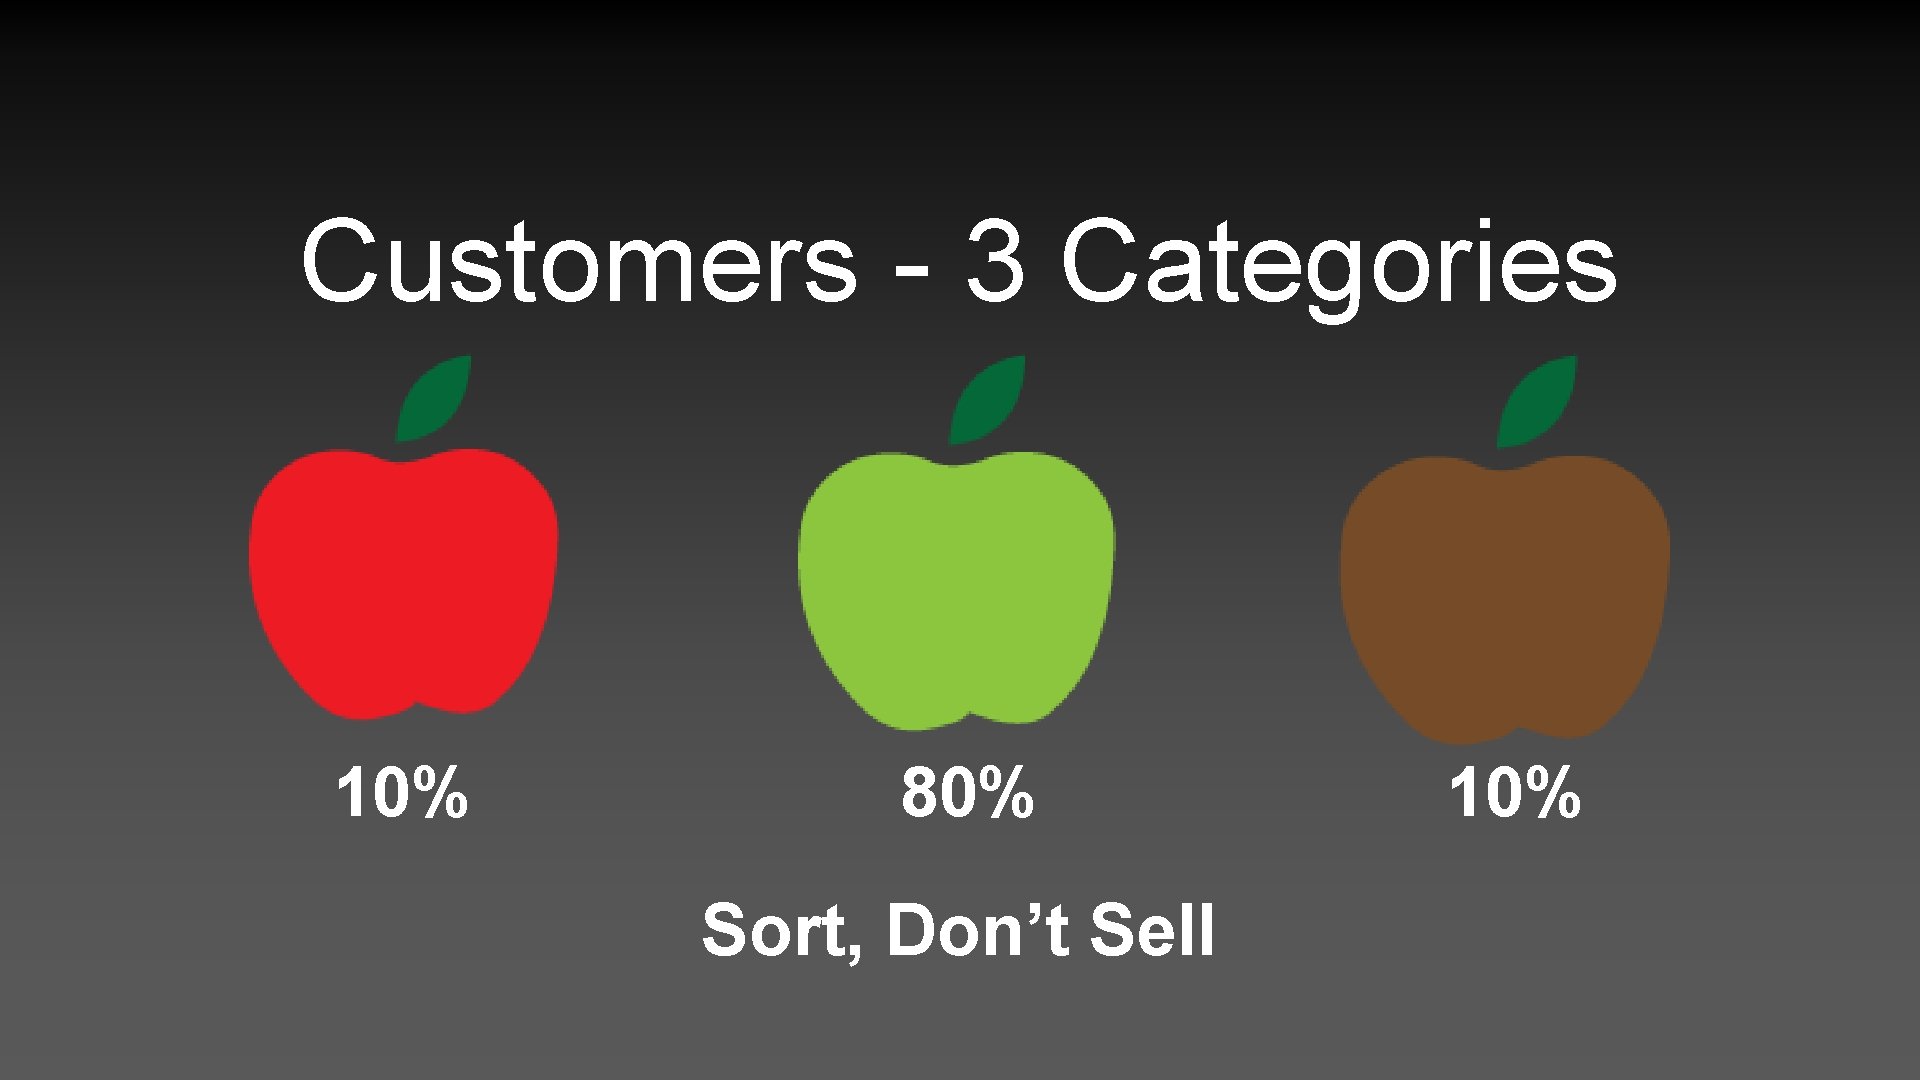 Customers - 3 Categories 10% 80% Sort, Don’t Sell 10% 